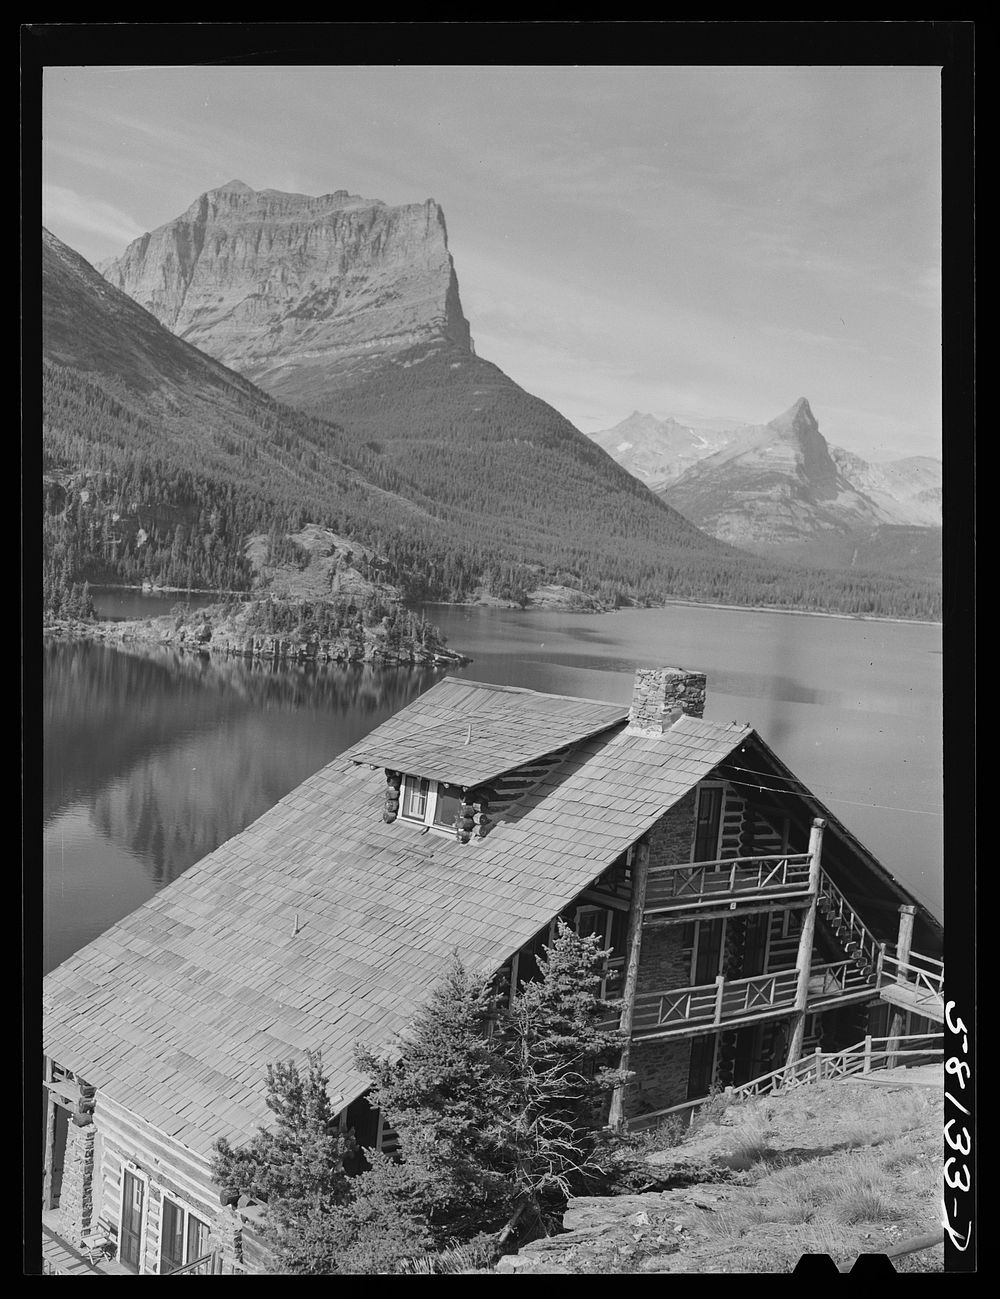 Going-to-the-Sun chalets on Saint Mary Lake. Glacier Park, Montana. Sourced from the Library of Congress.